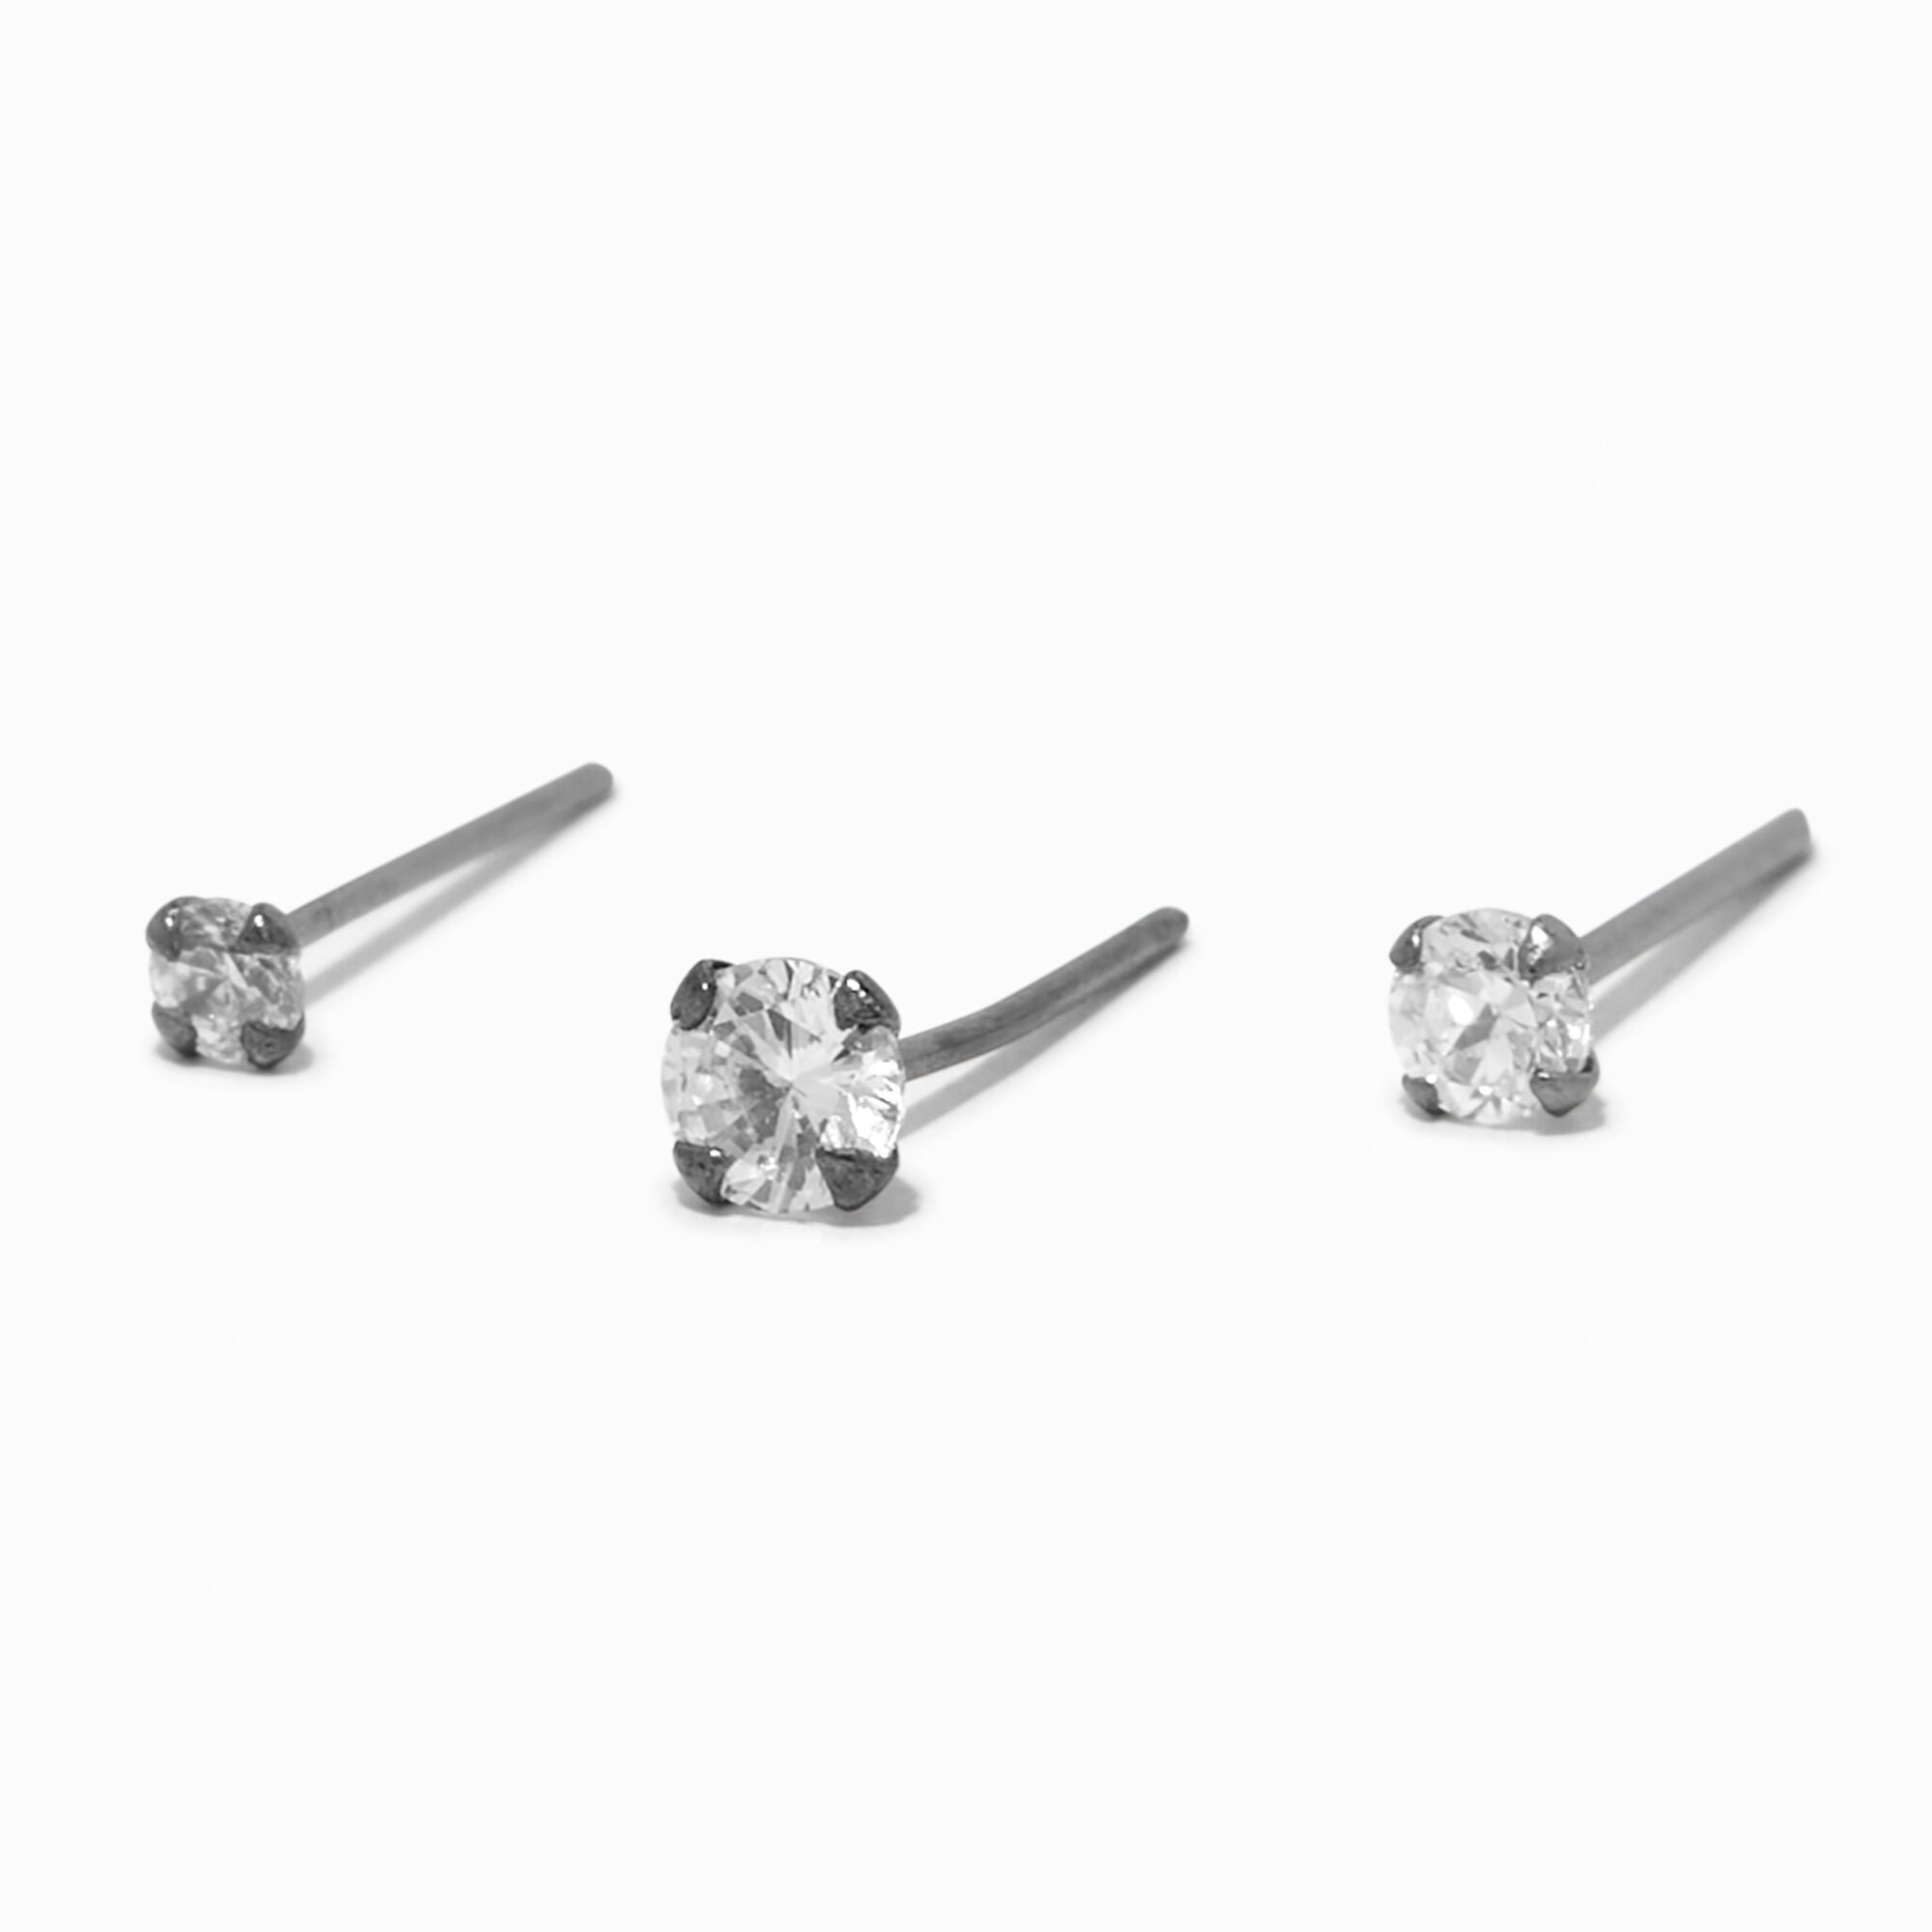 View Claires 20G Square Crystal Nose Studs 3 Pack Silver information